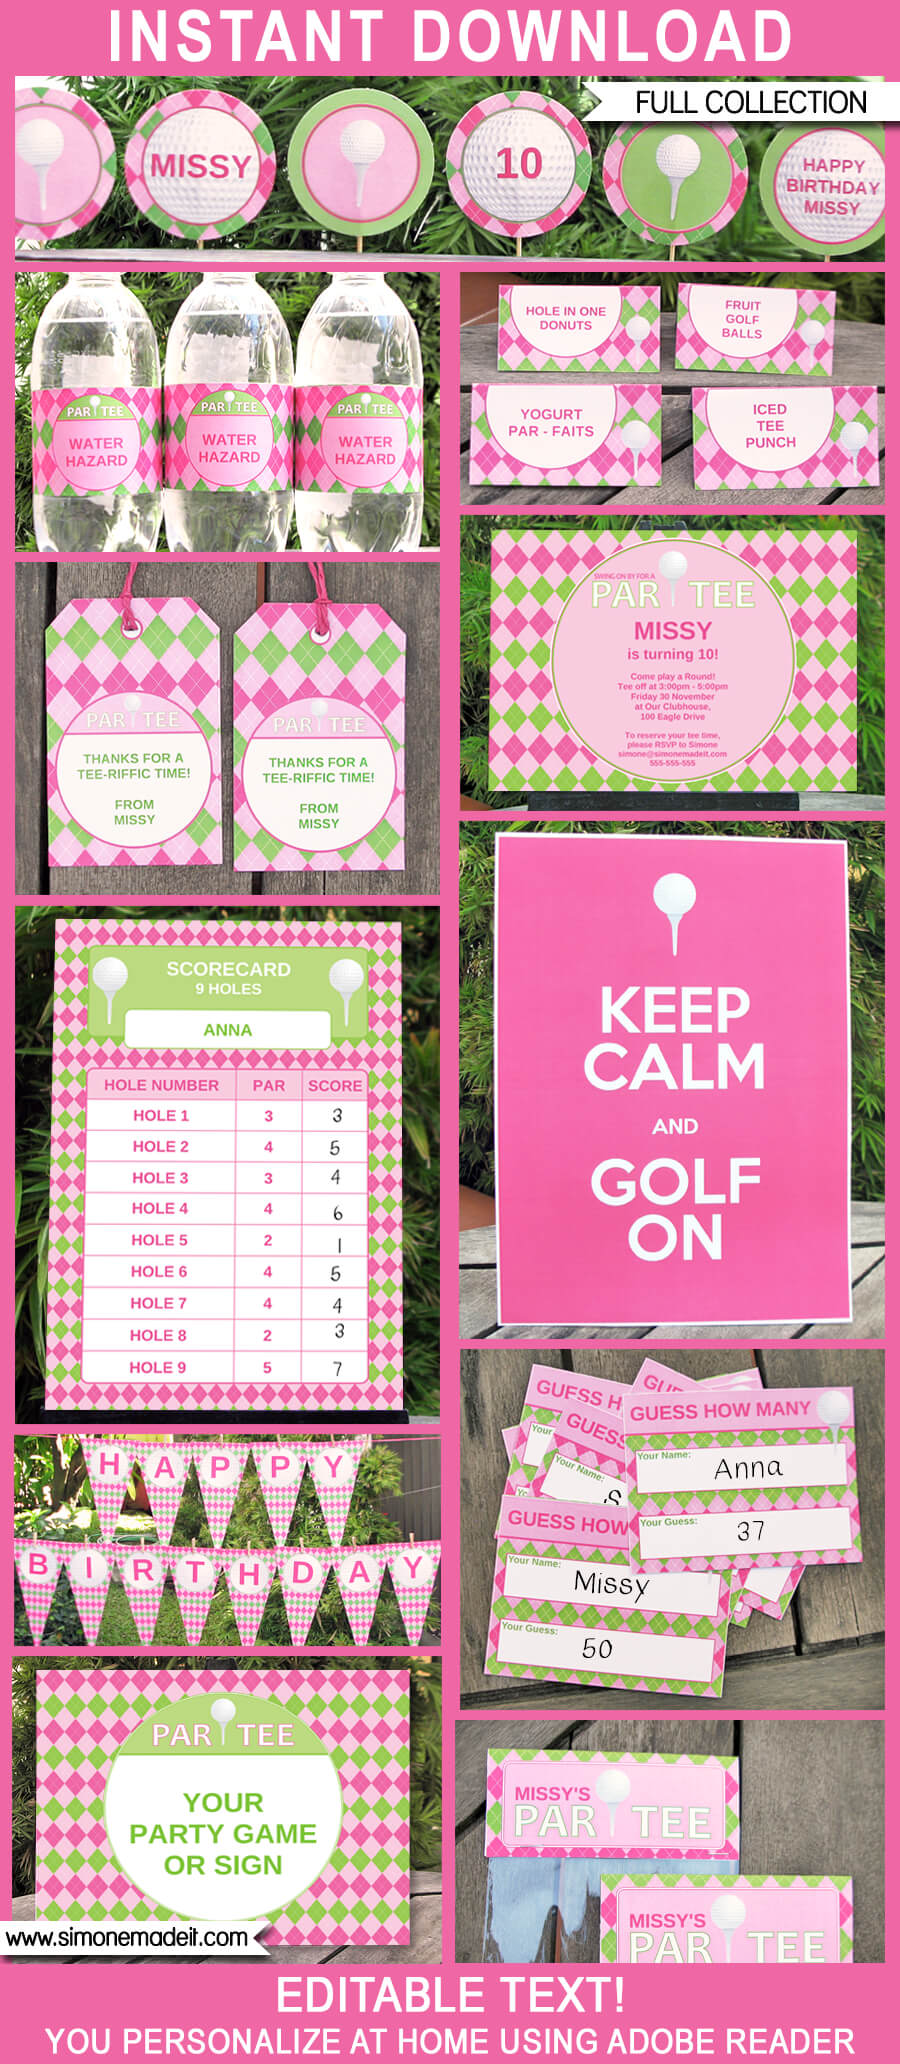 Par-Tee Time - Golf - Birthday or Retirement Party 4x6 Picture